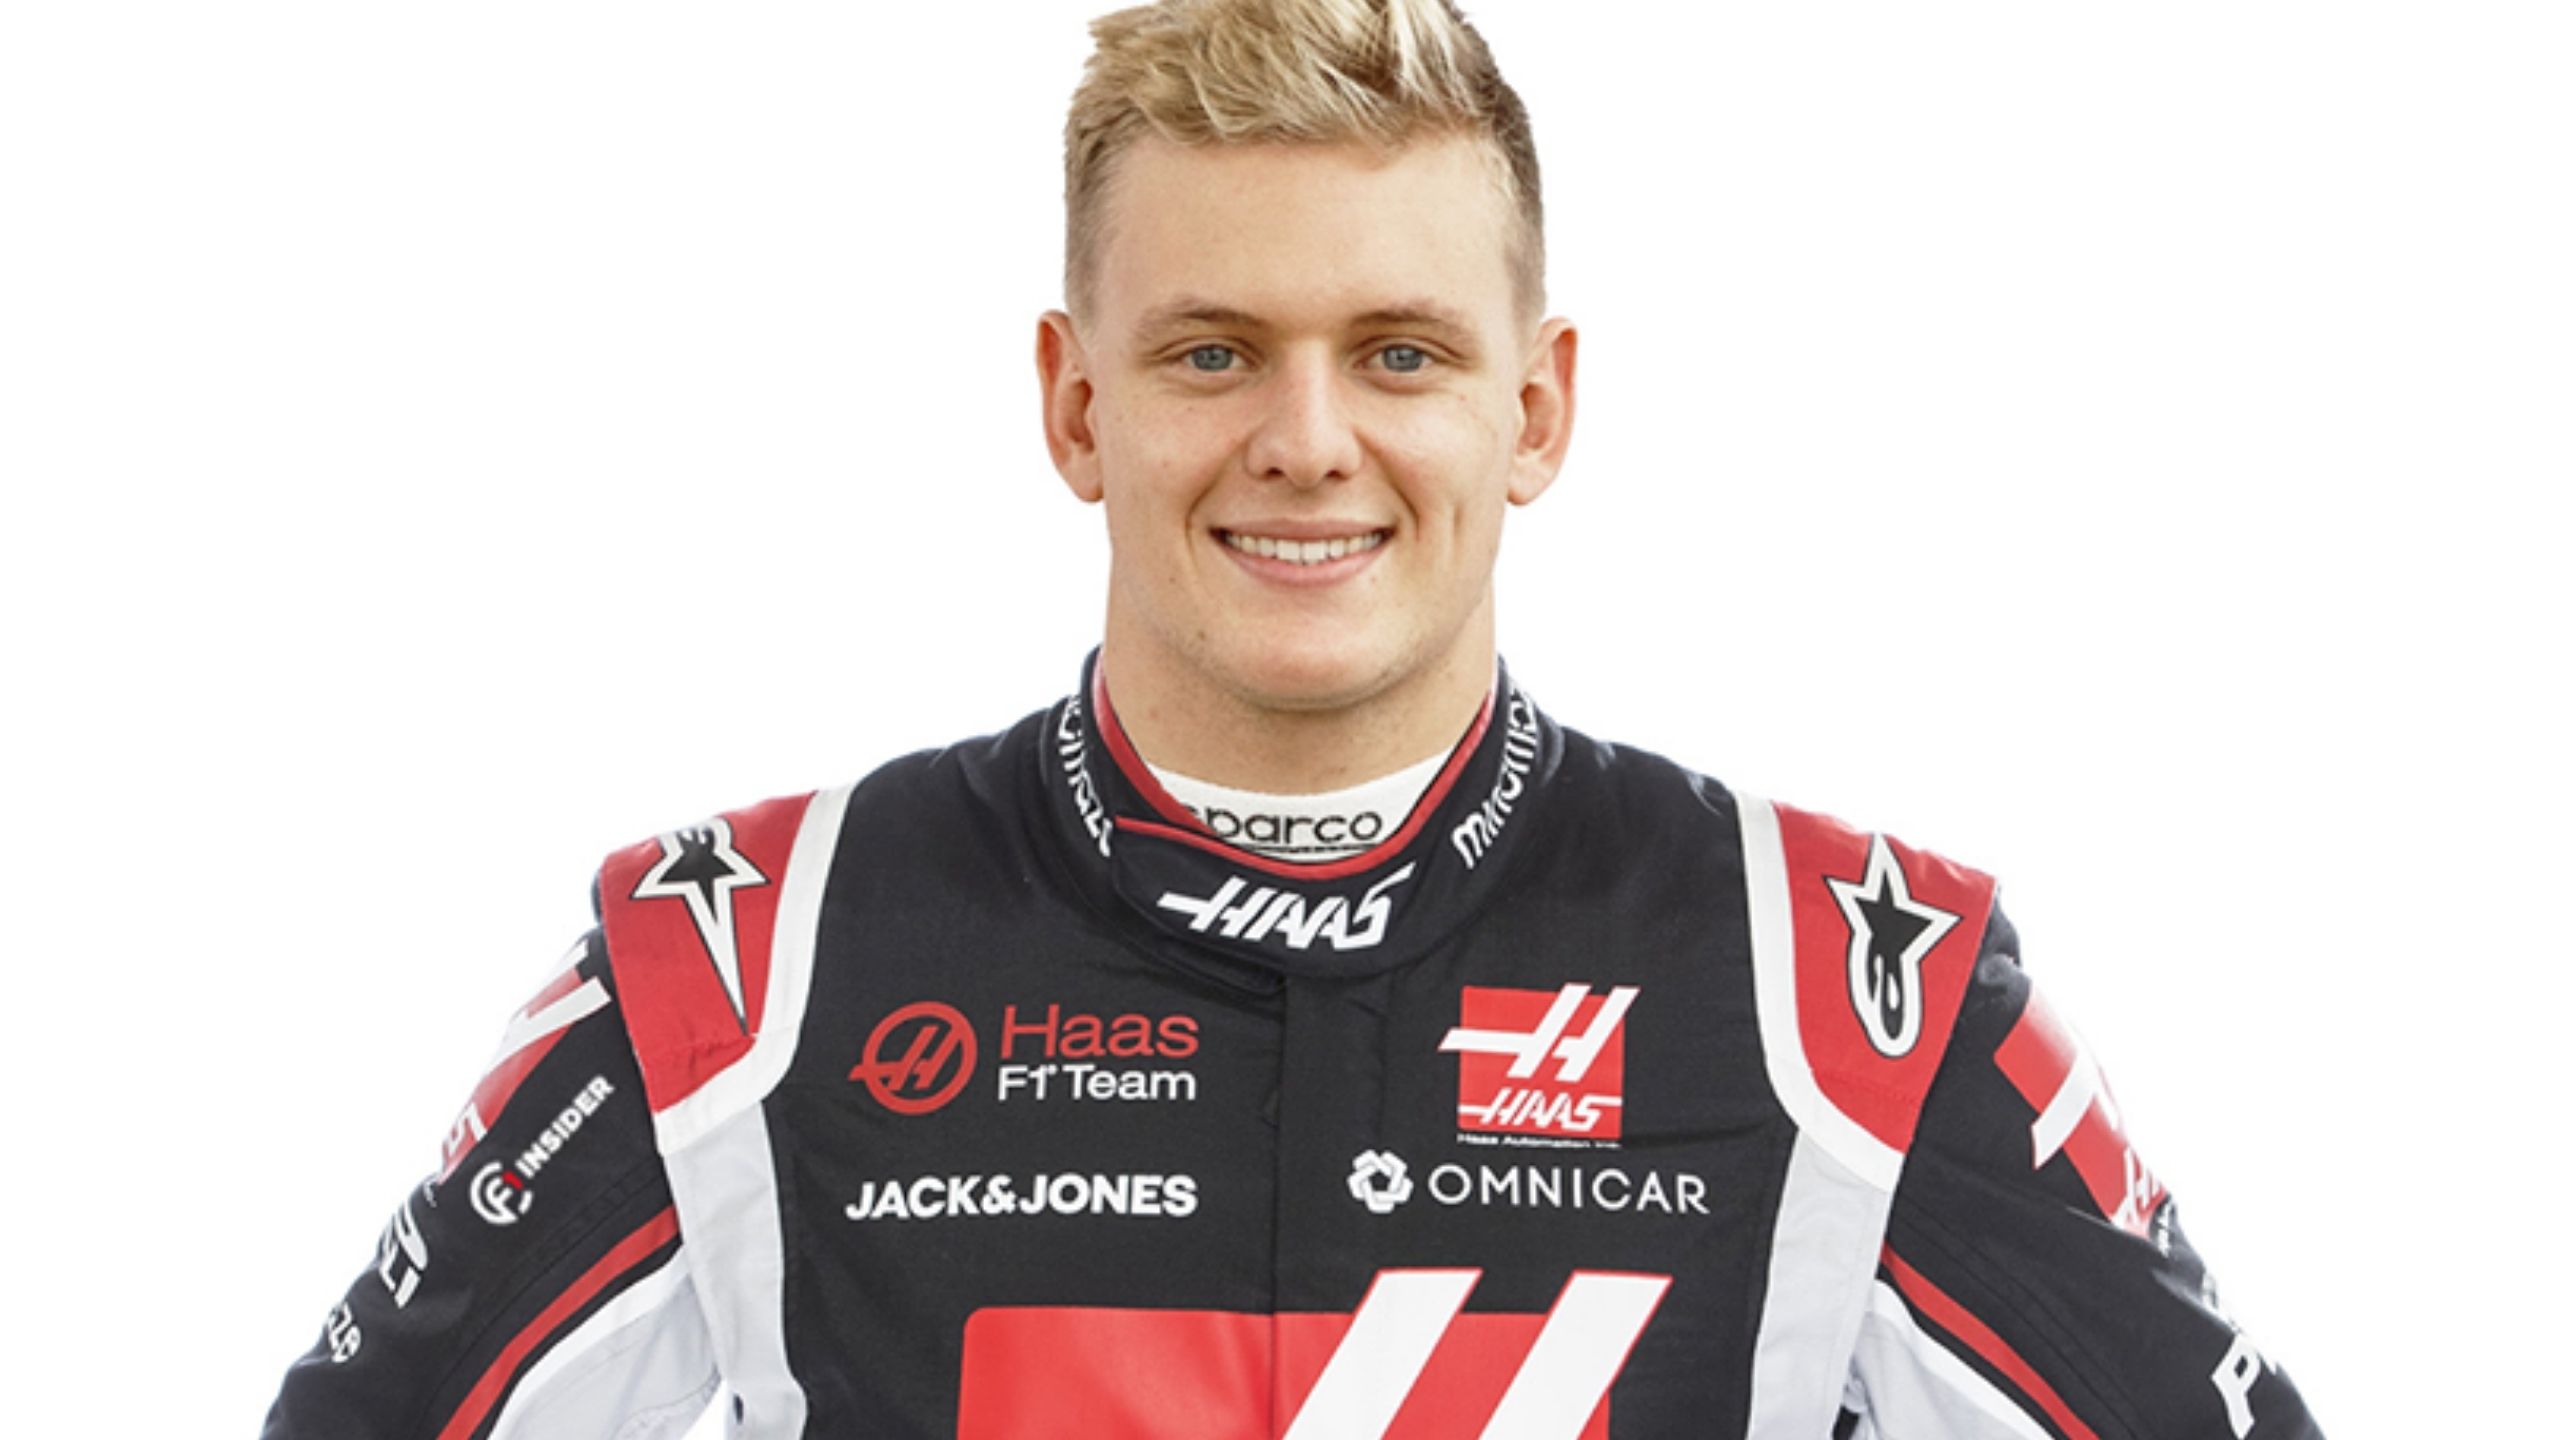 Mick Schumacher confirmed for Abu Dhabi FP1 with Haas